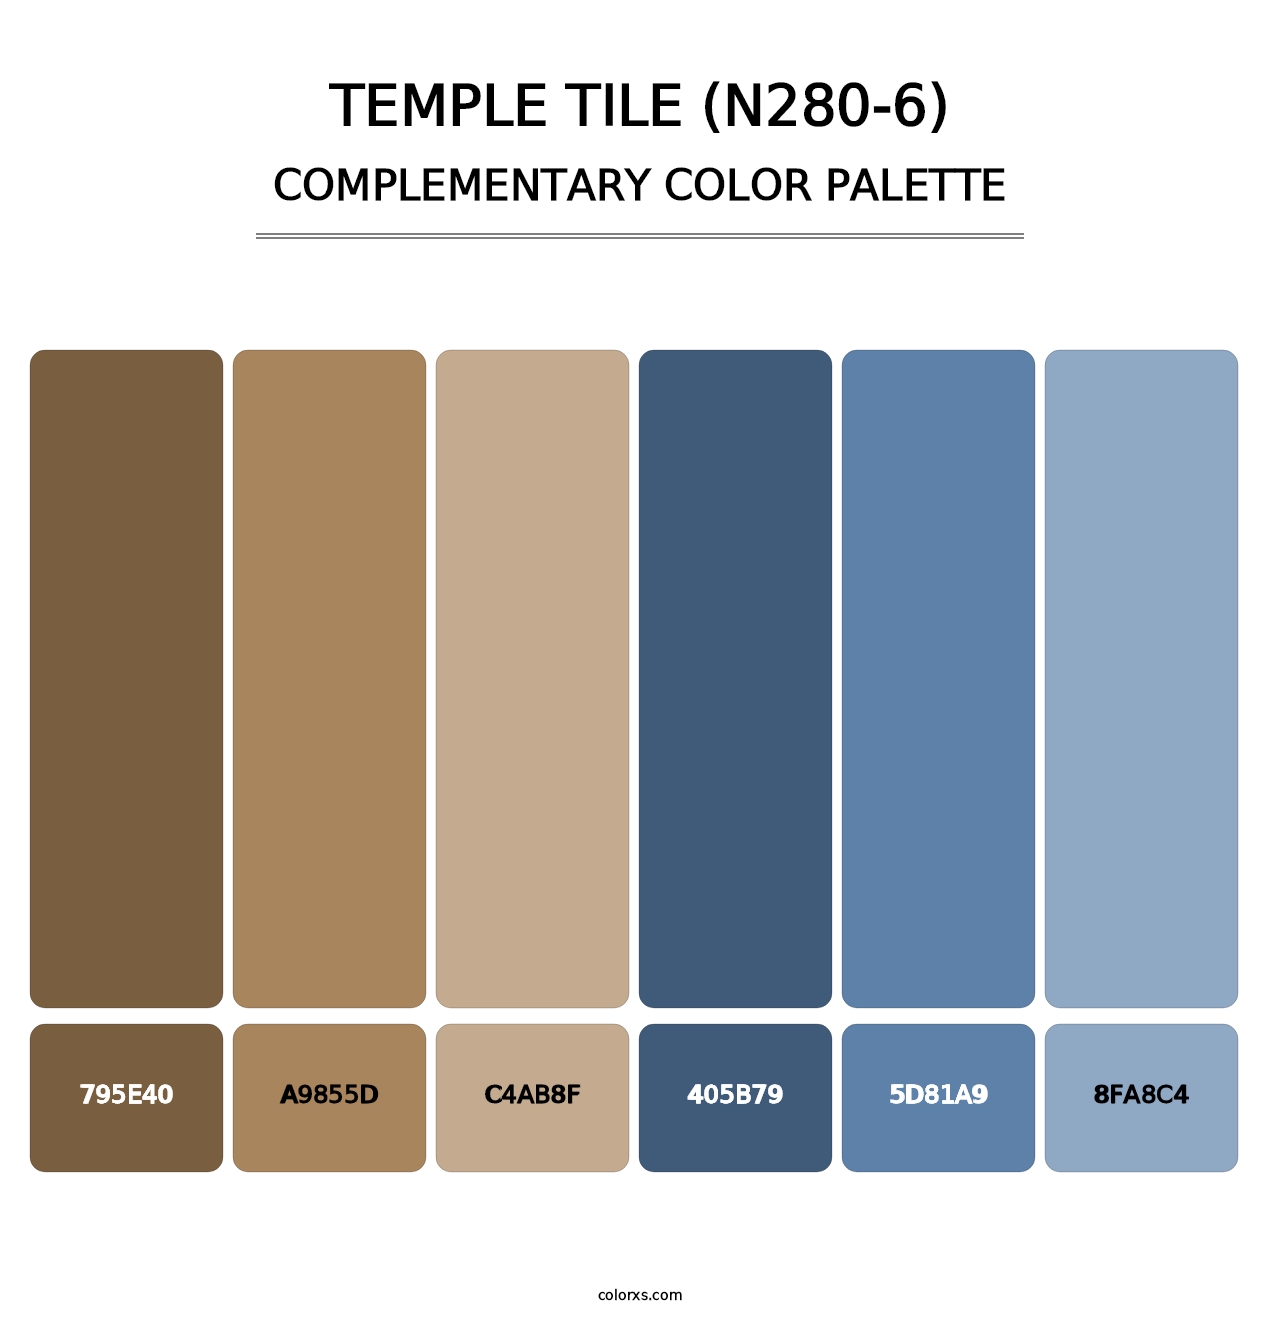 Temple Tile (N280-6) - Complementary Color Palette